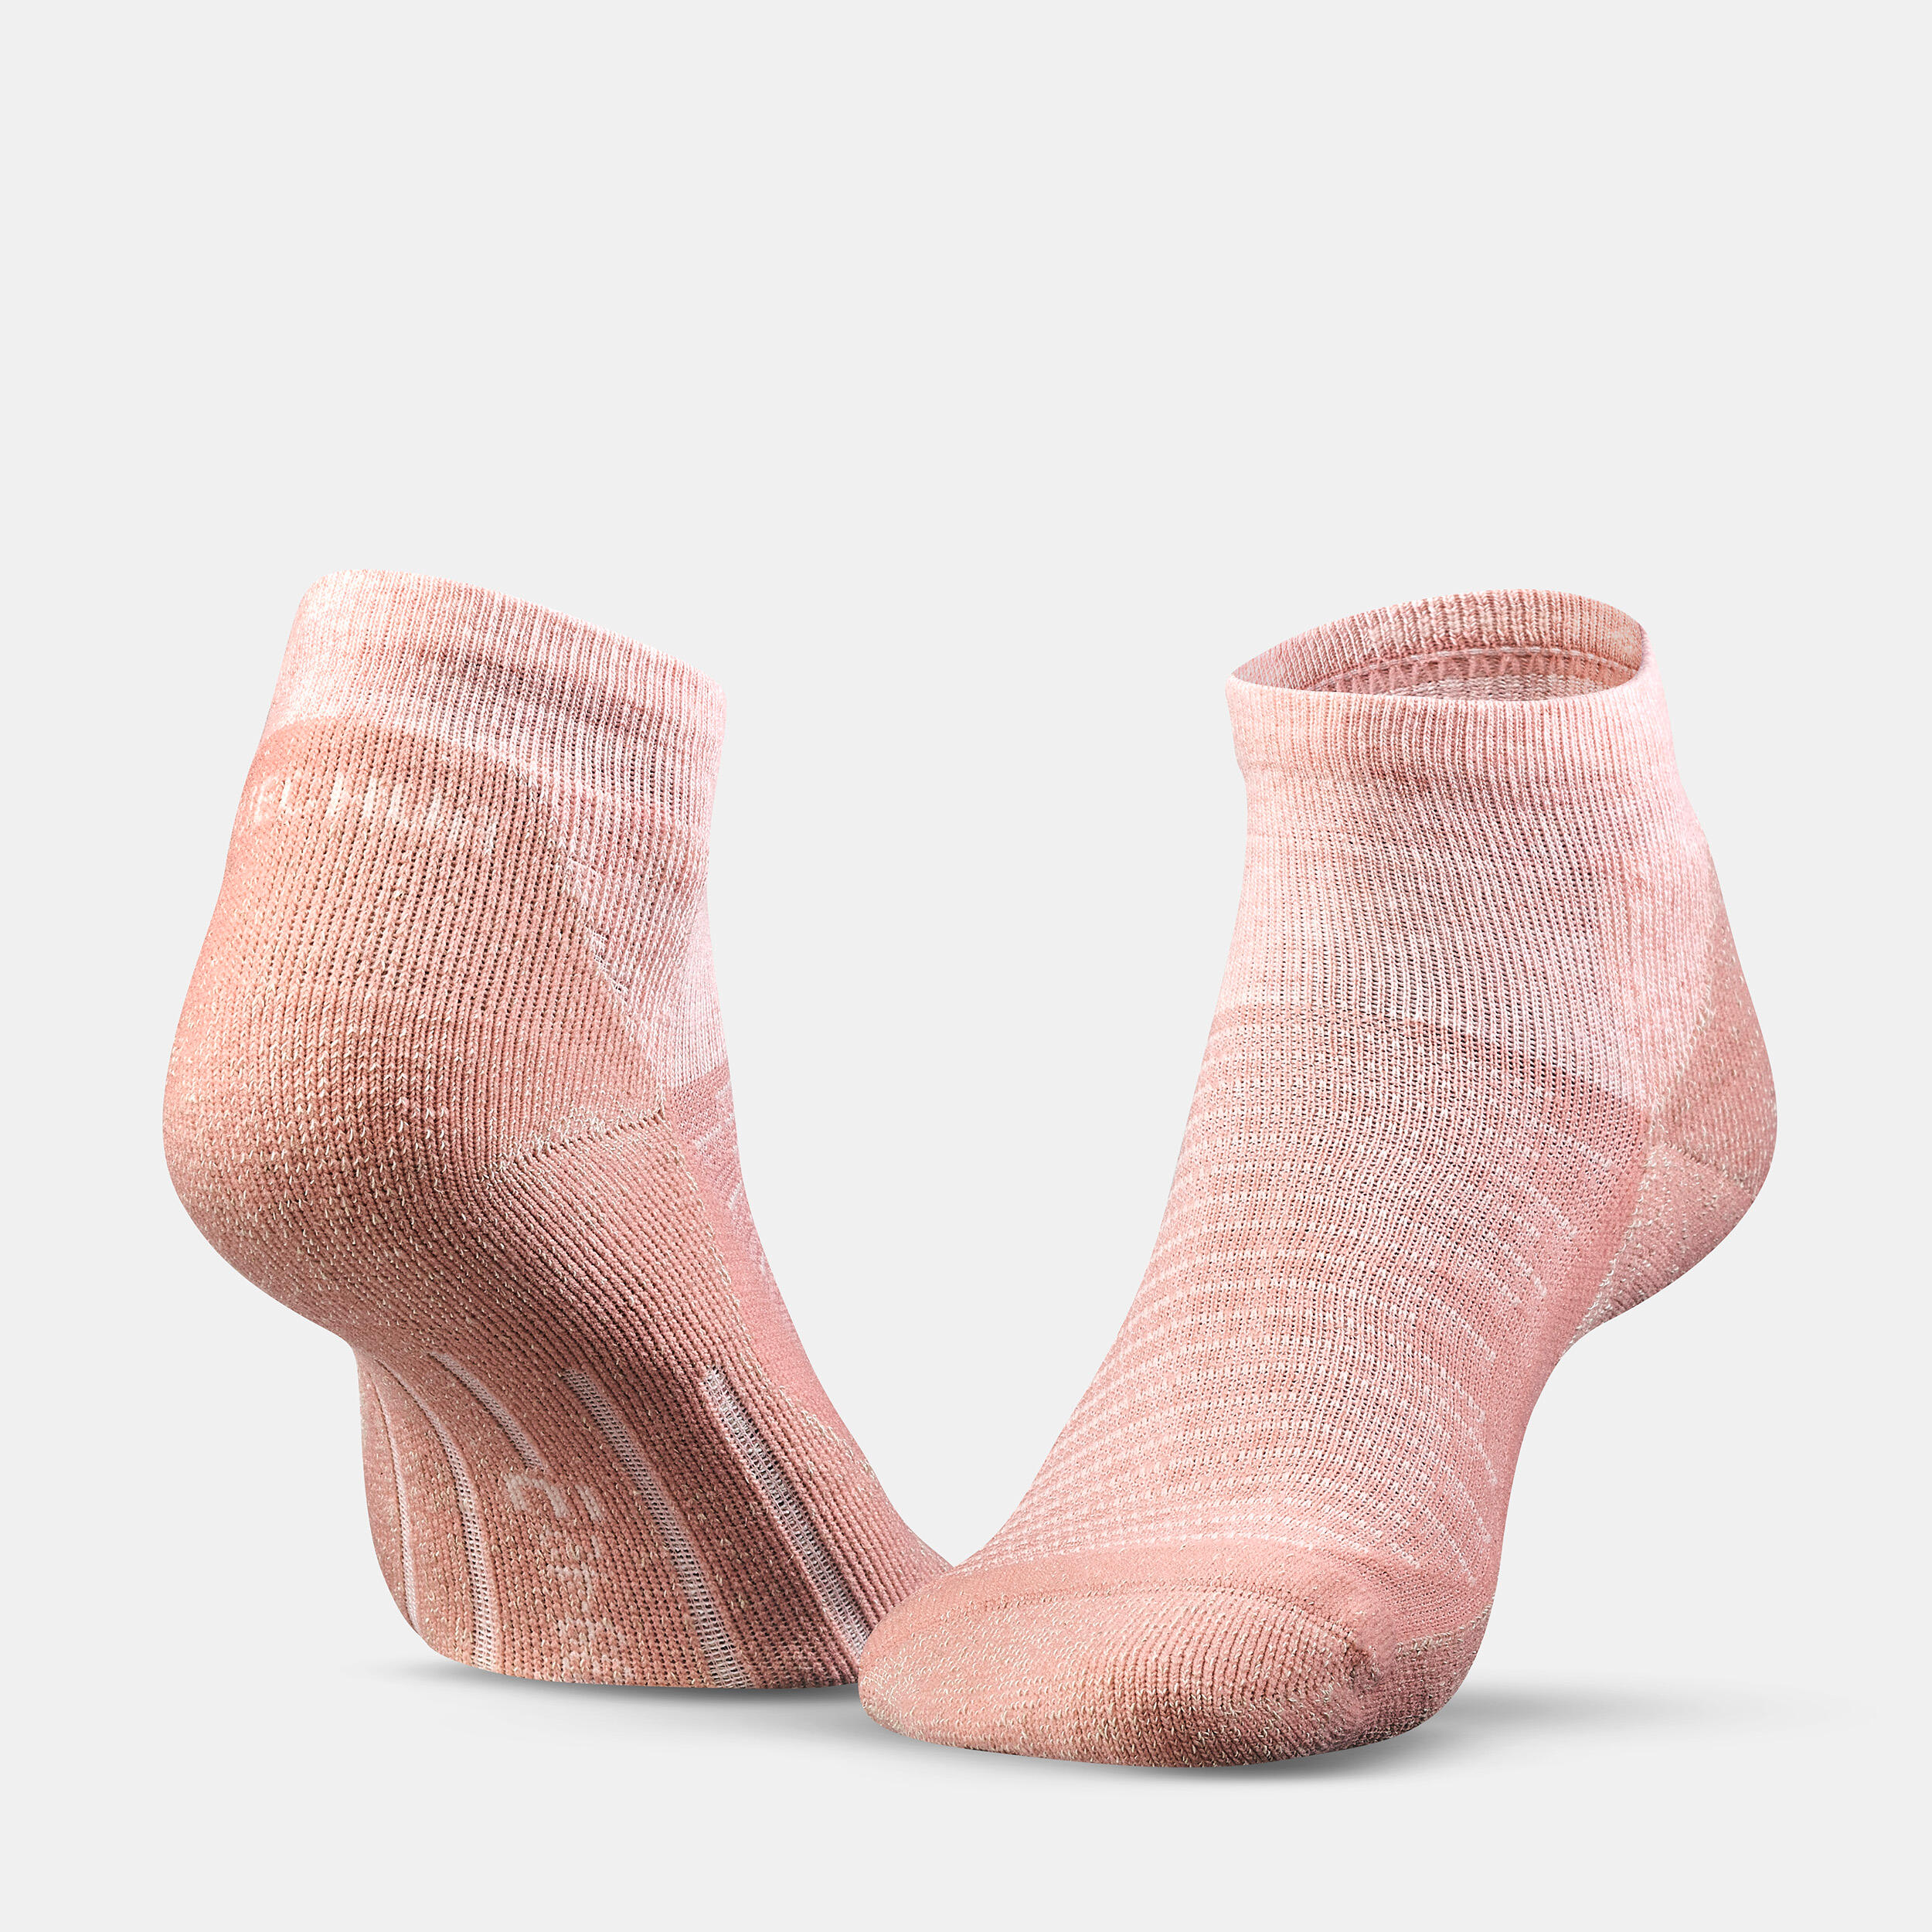 Hike 100 Mid Socks - Pink and Grey- Pack of 2 3/9